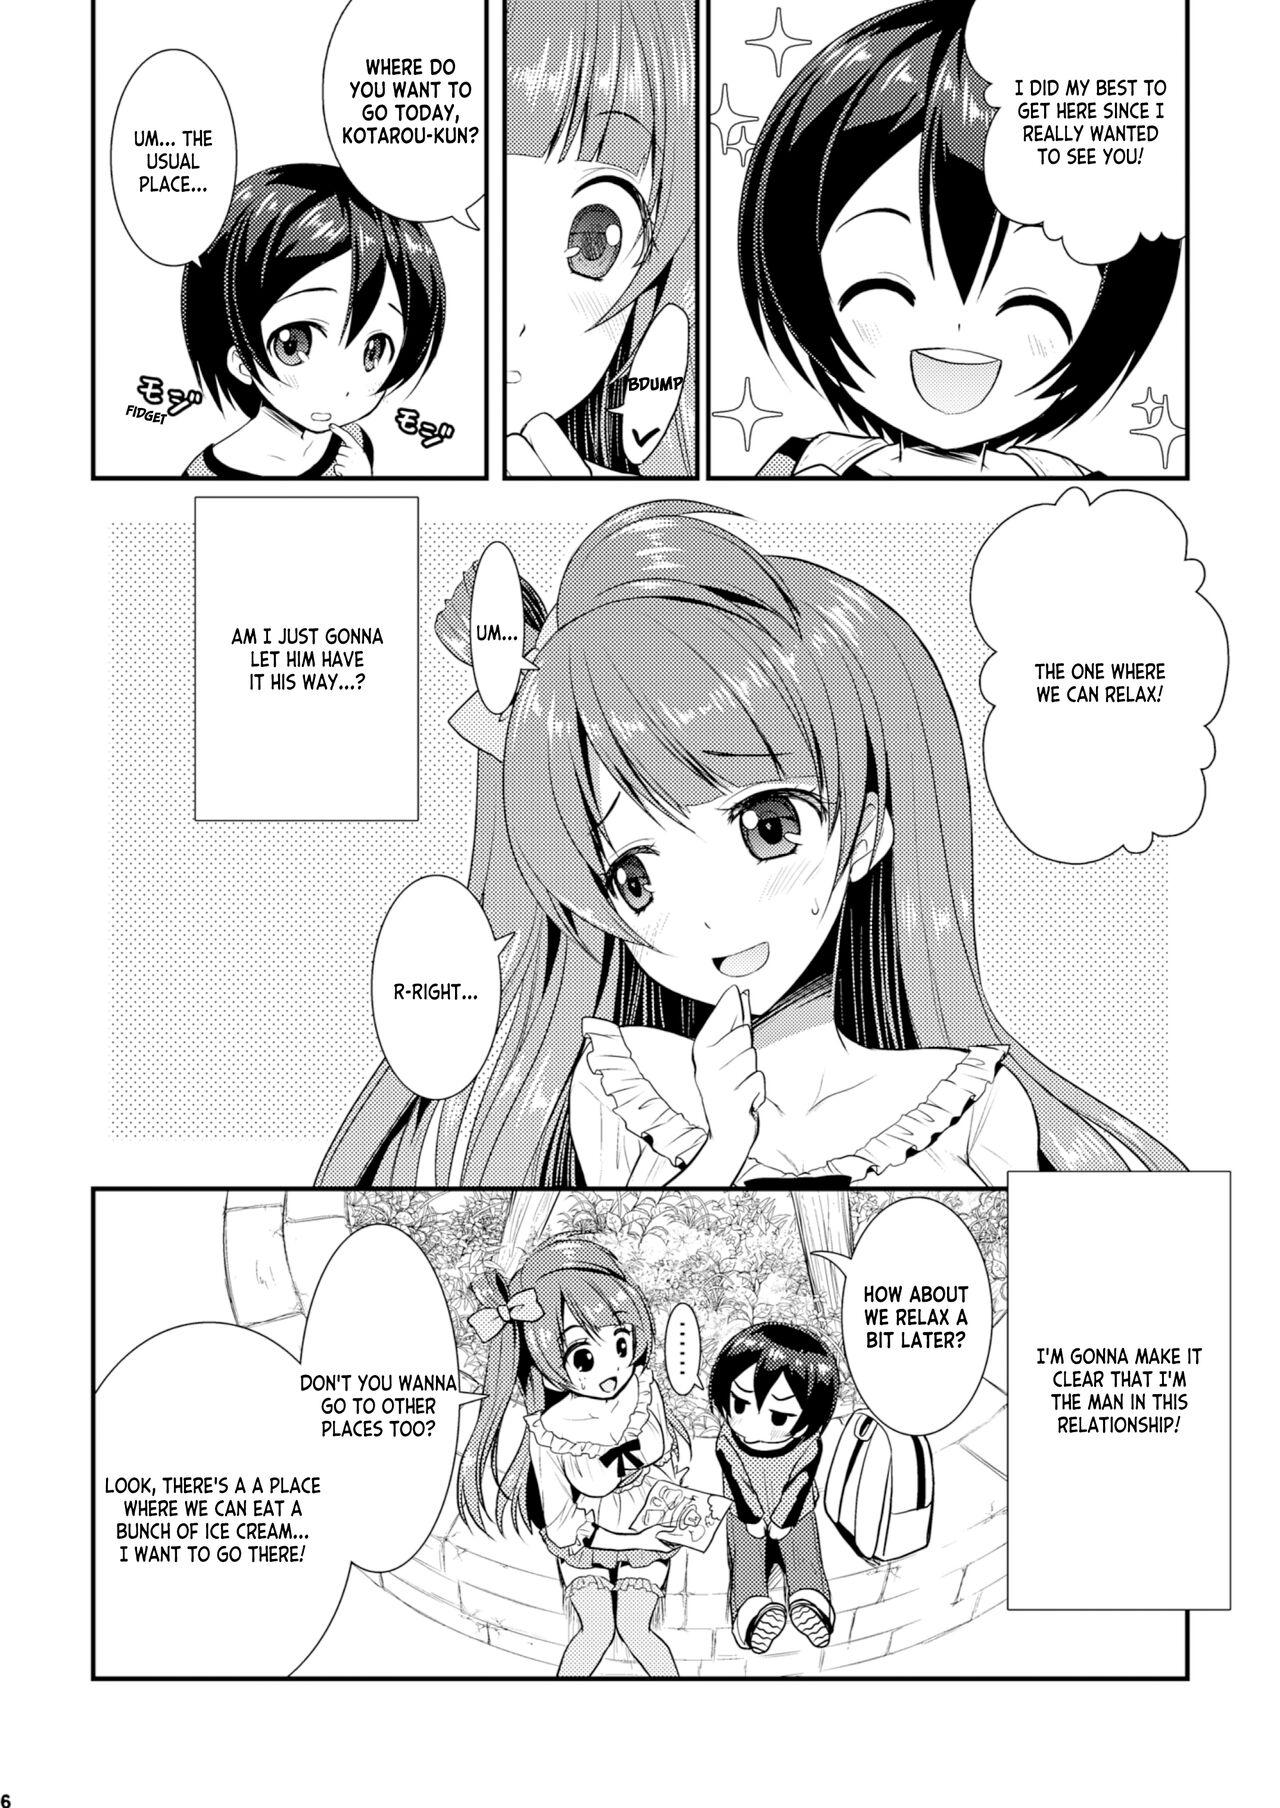 Scissoring Eat Meat Girl 2 - Love live Amadora - Page 6